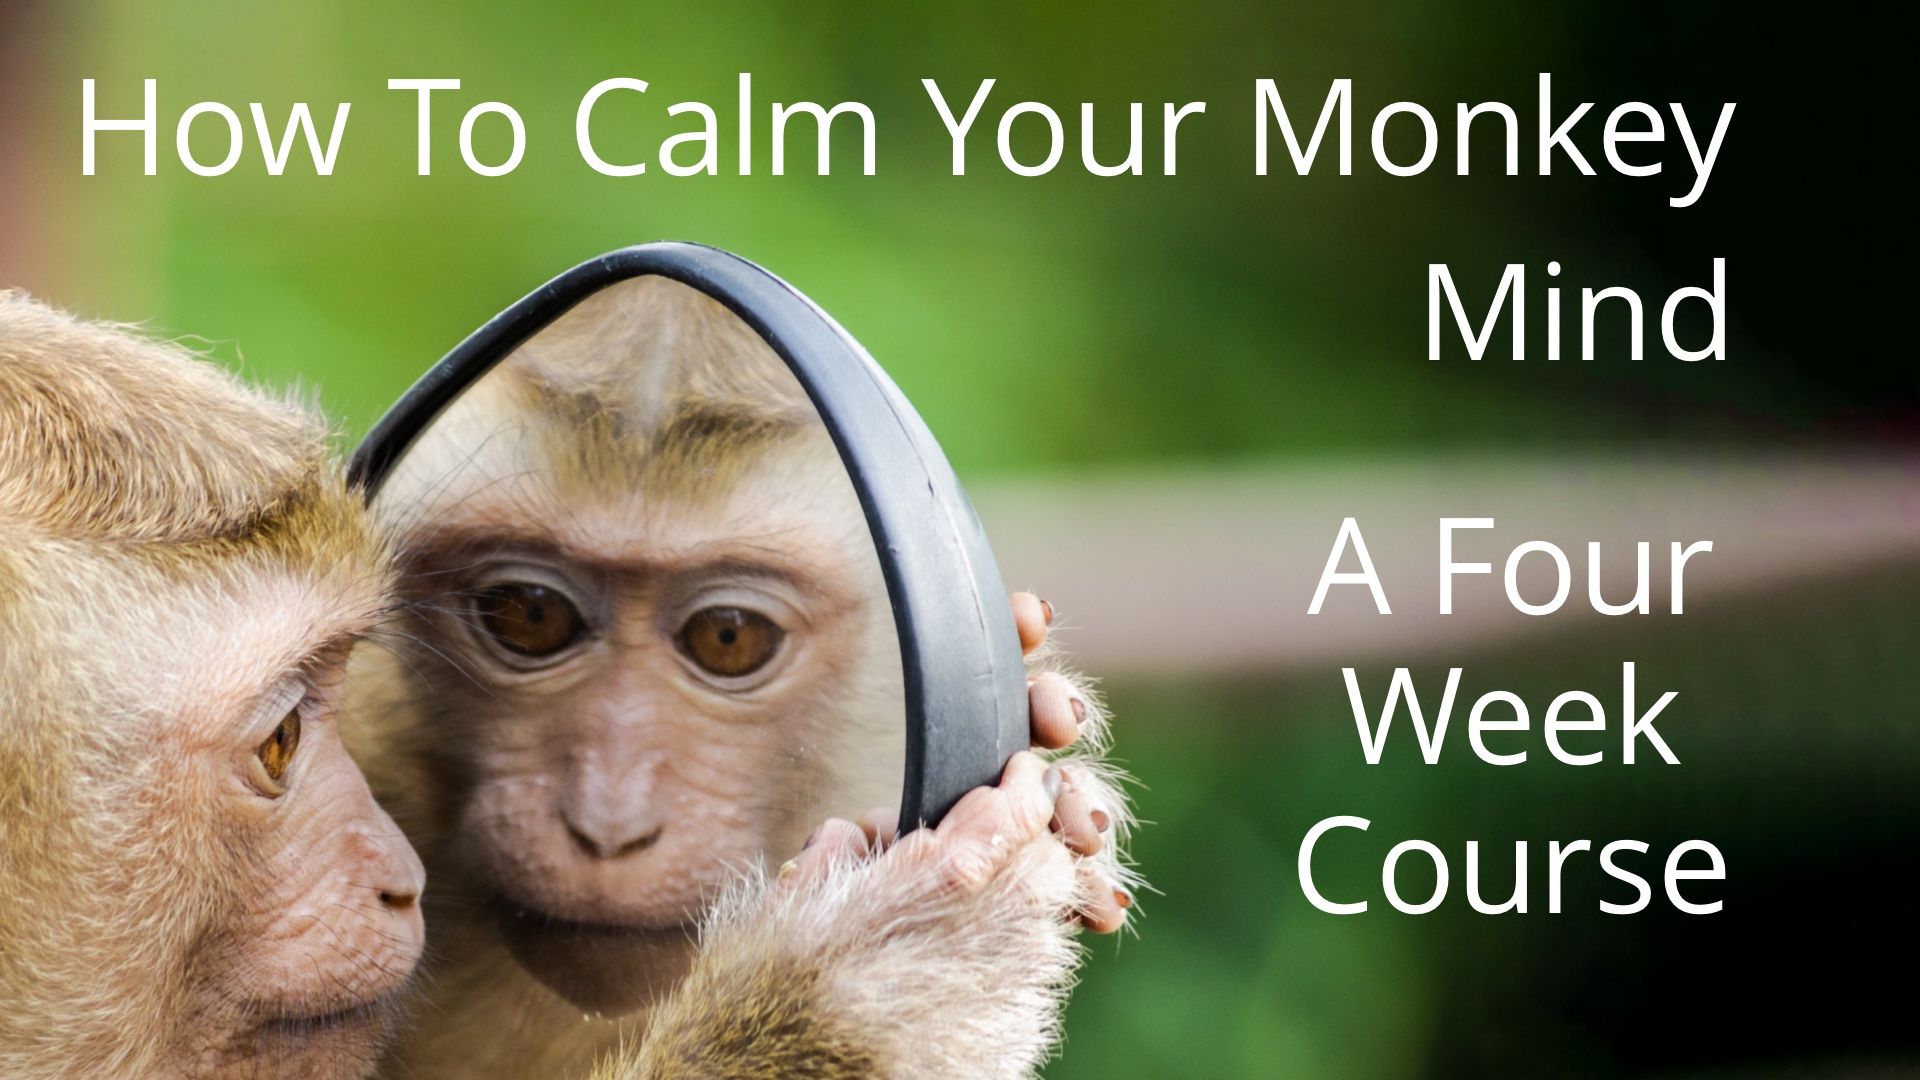 Calming The Monkey Mind - A 4-week course